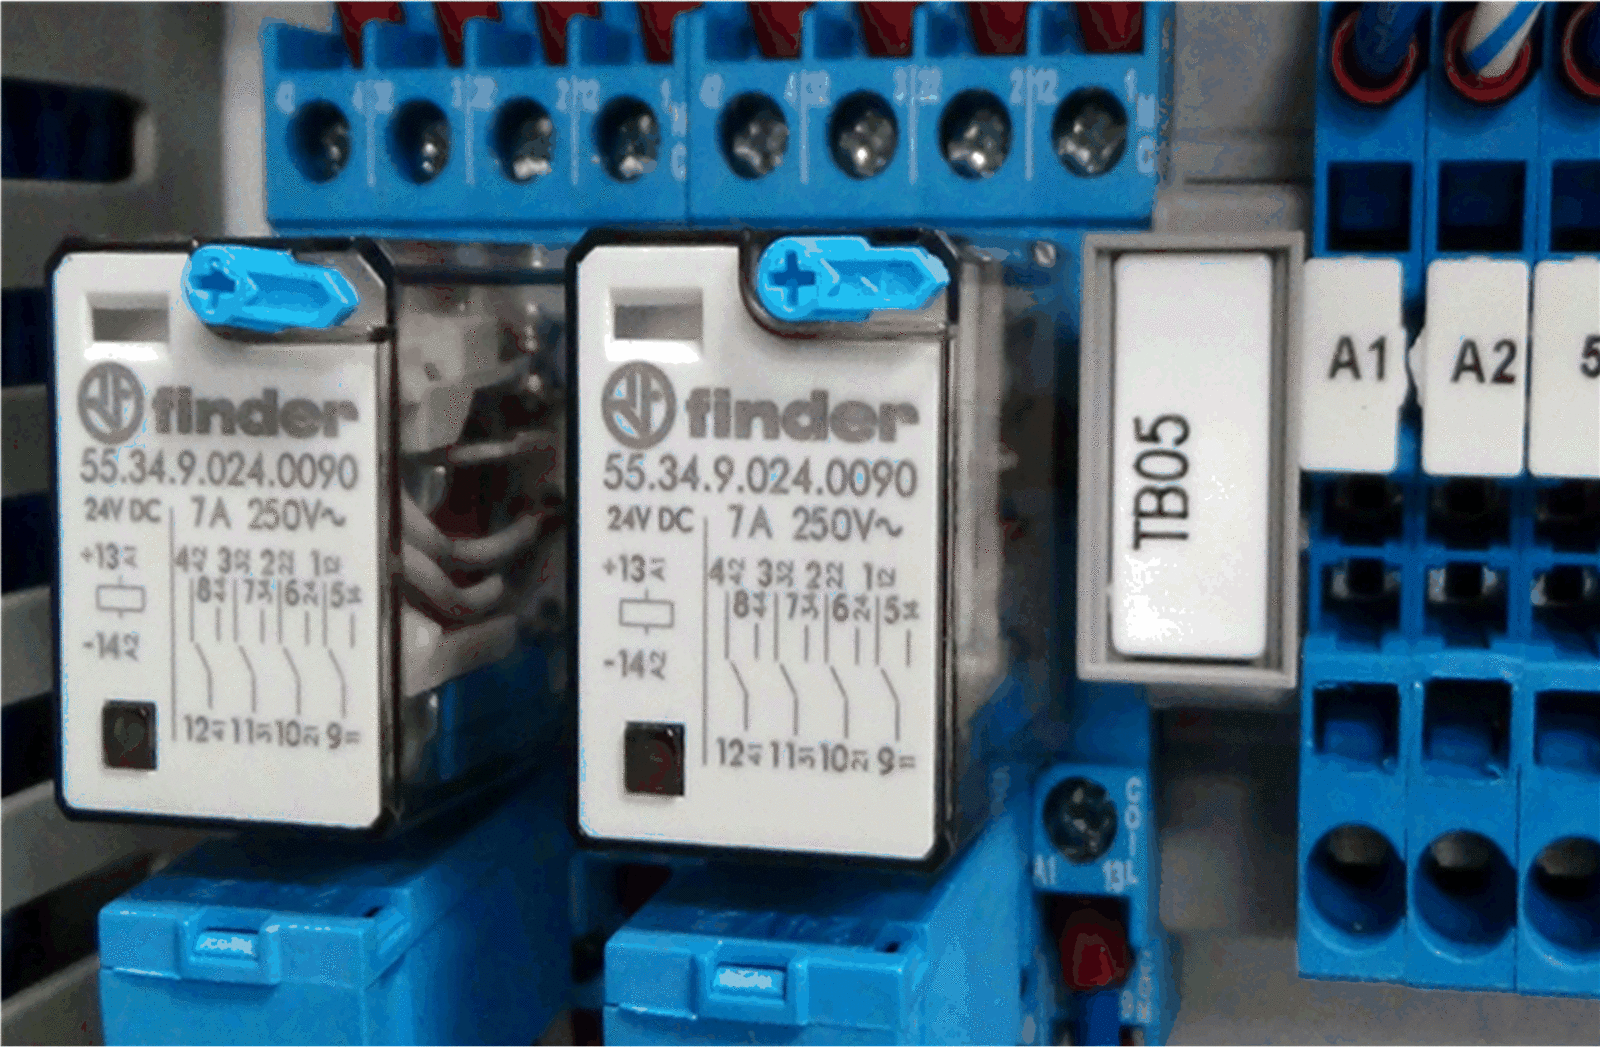 Common Types of Relays, Applications, Electrical Contact Forms